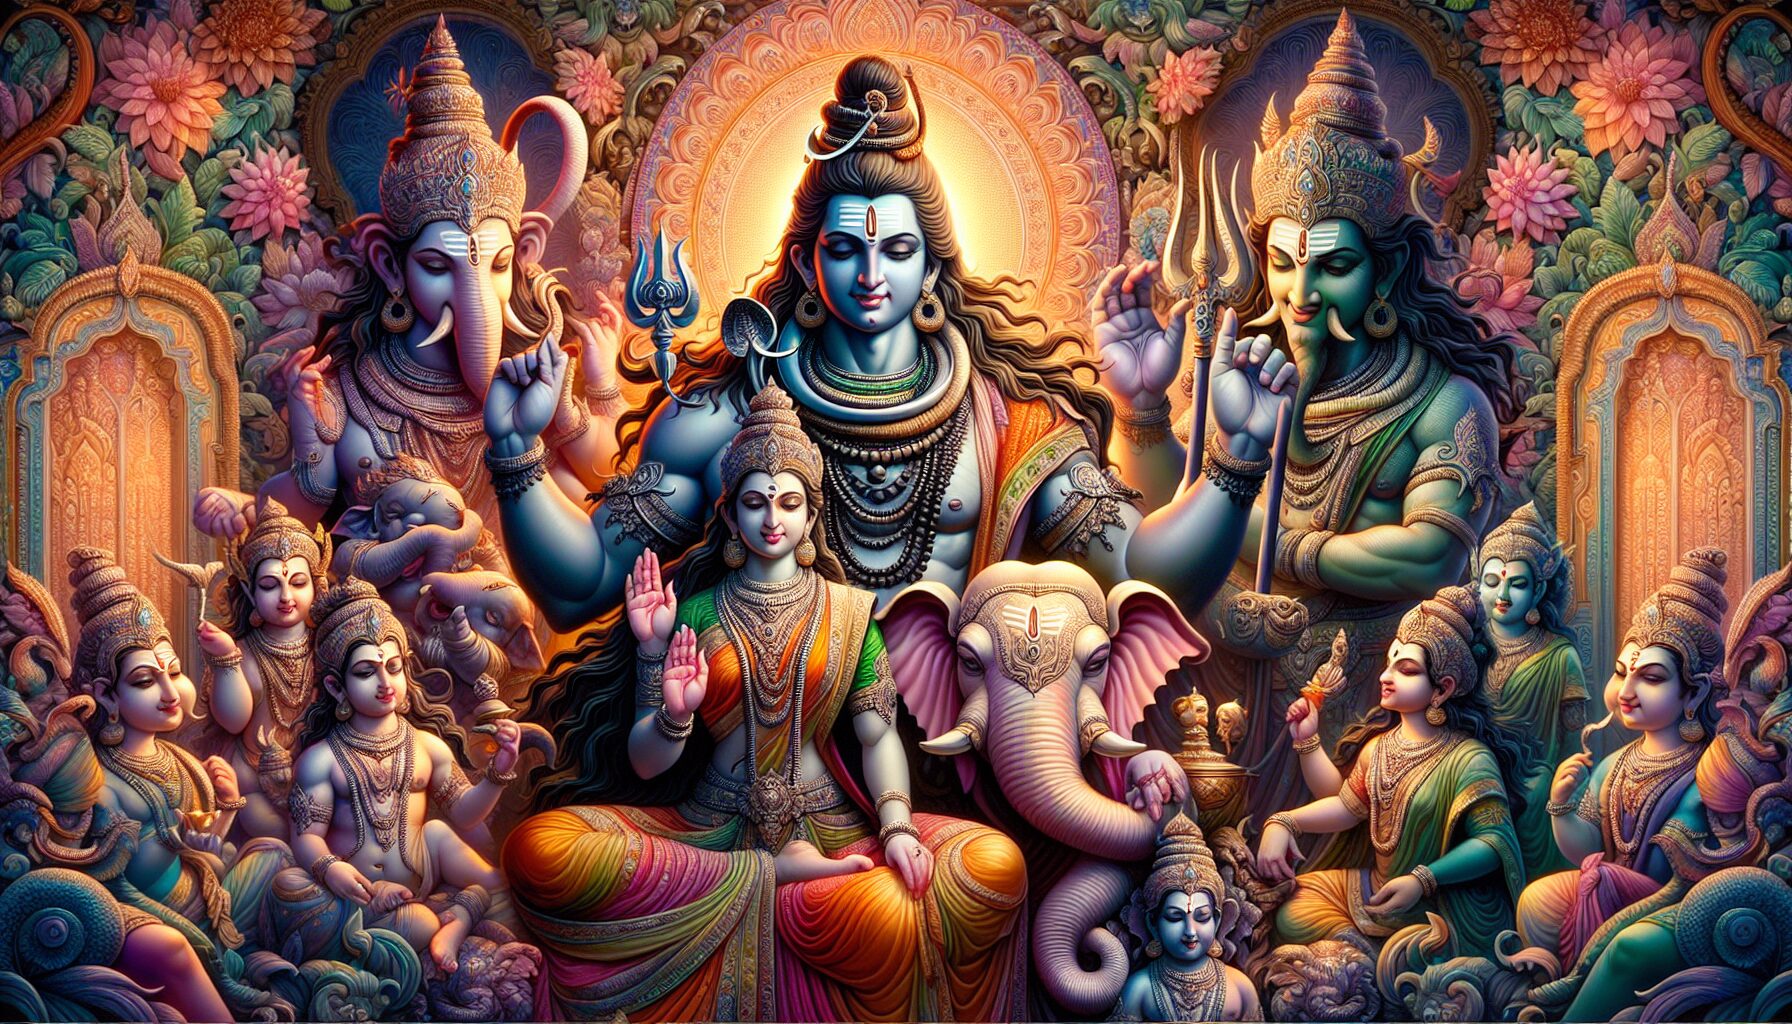 How Are Shiva And His Family Depicted In Art And Sculpture?